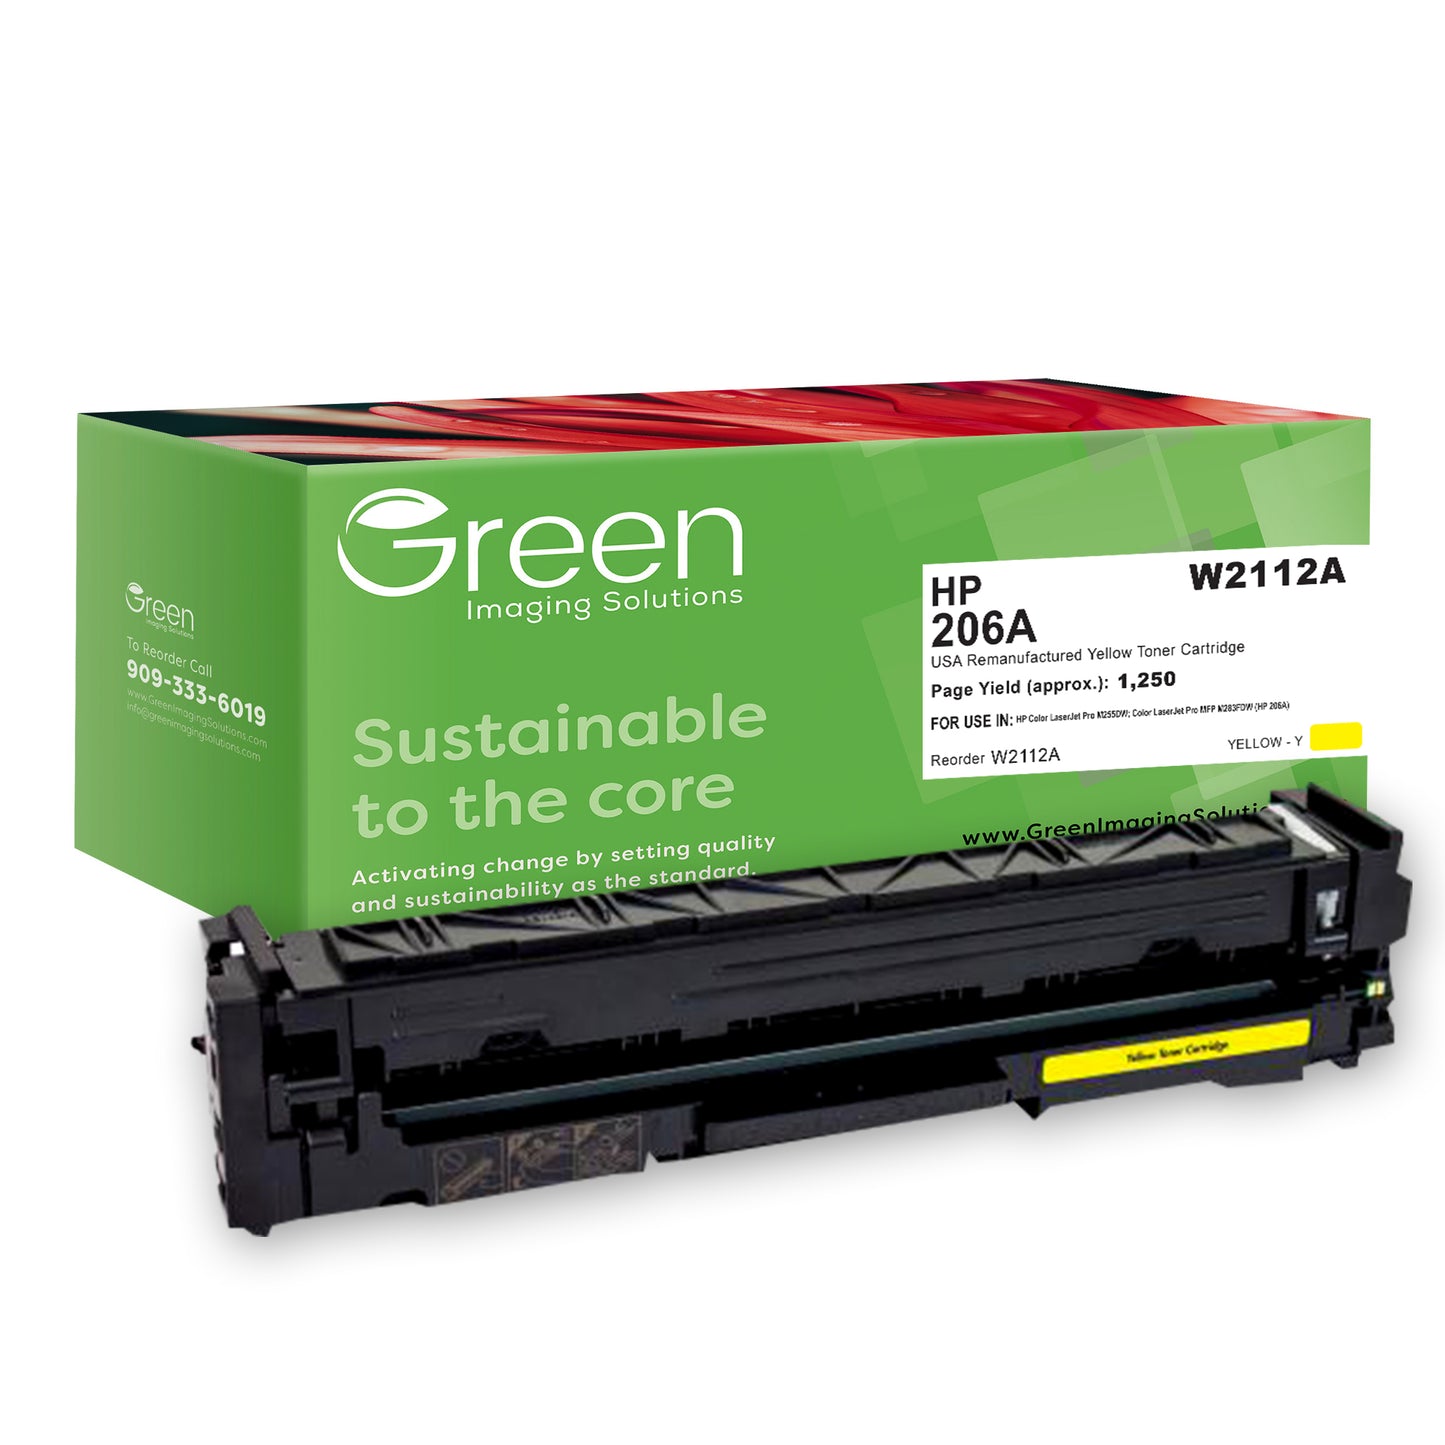 GIS USA Remanufactured Yellow Toner Cartridge for HP W2112A (HP 206A)